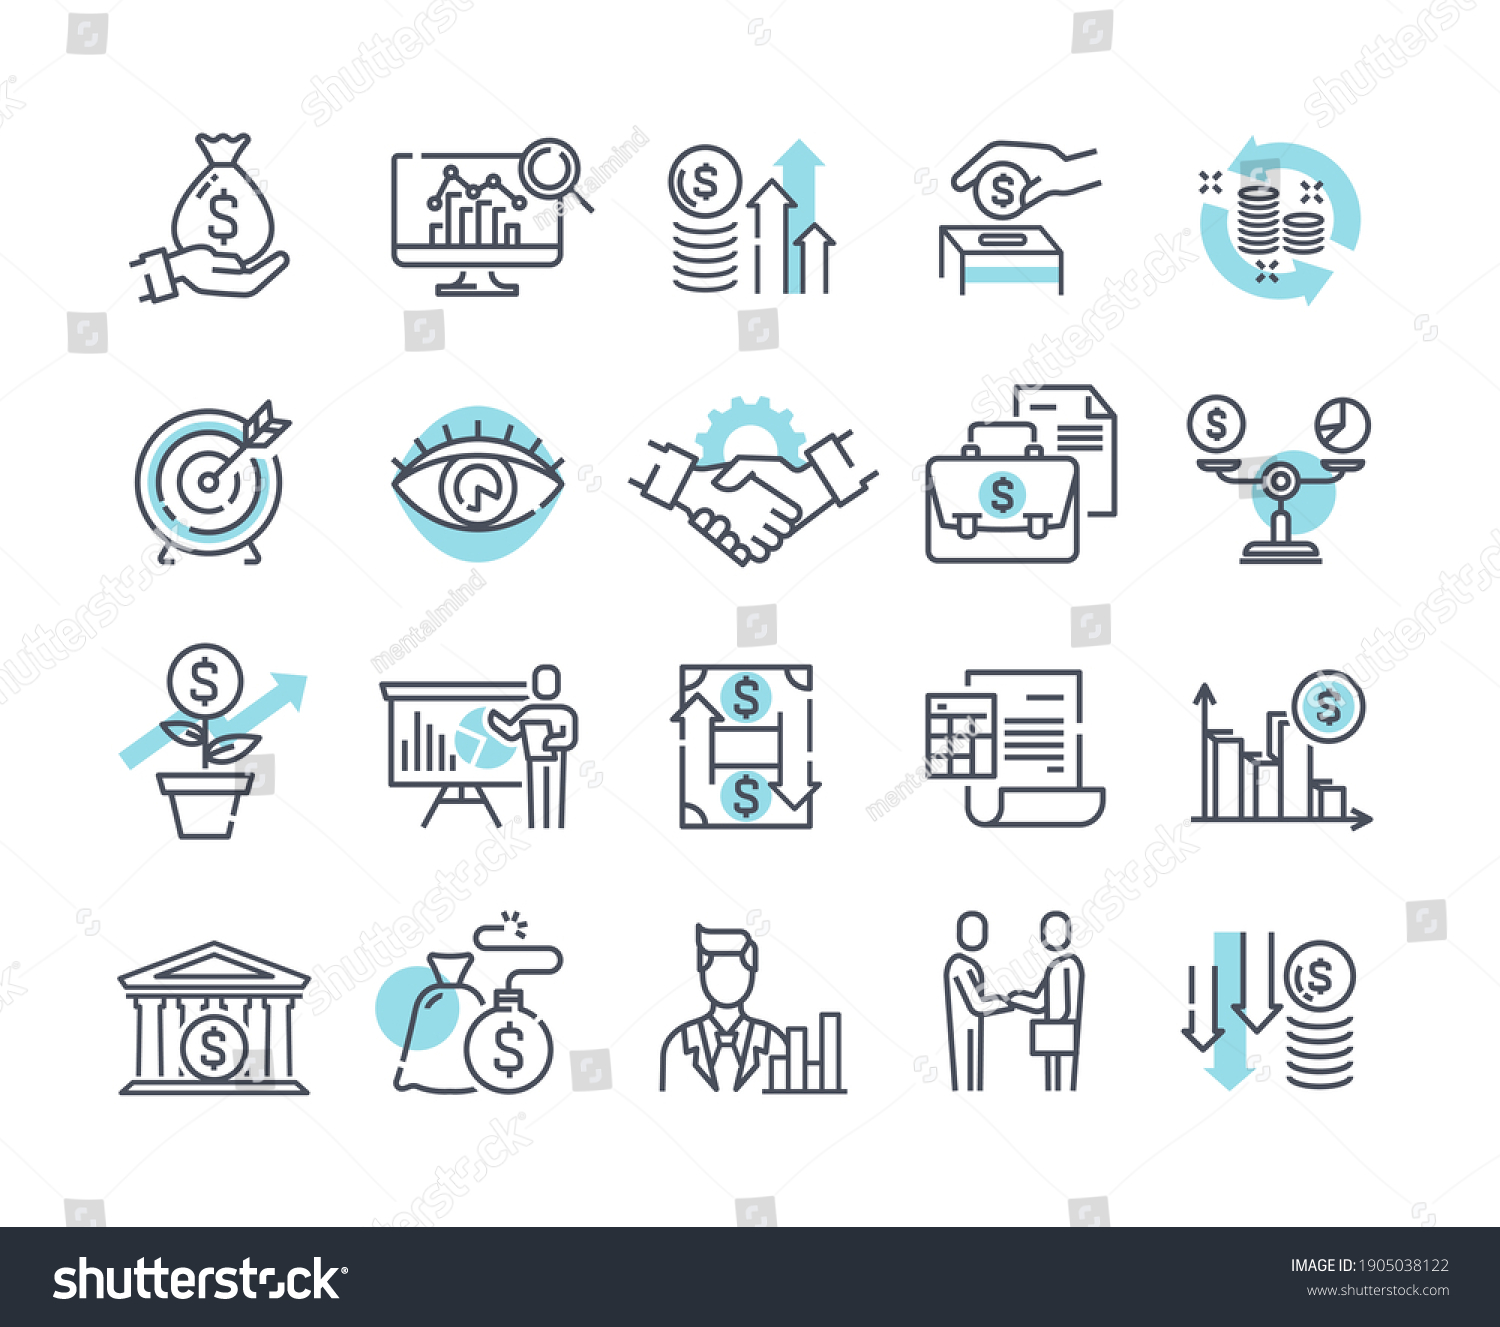 SVG of Financial management outline icons, trade service and investment strategy. Collection of thin line pictograms and infographics. Set of black and white vector illustrations isolated on white background svg